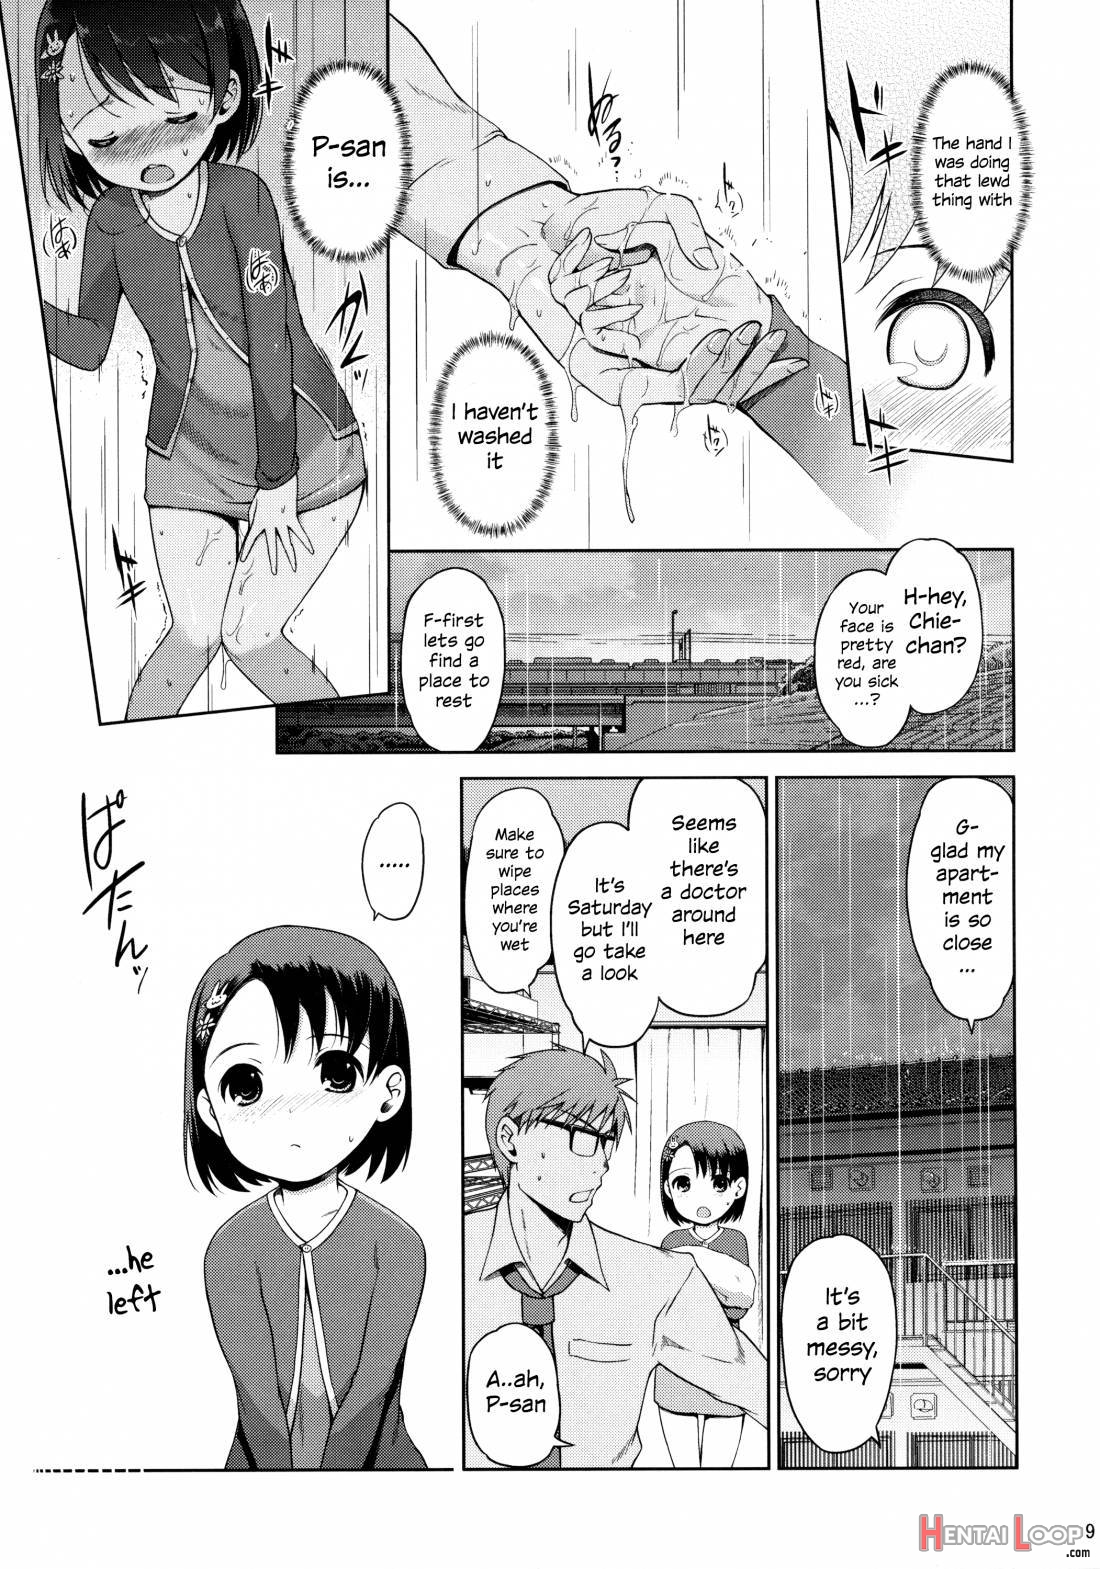 P-san To Issho! page 8